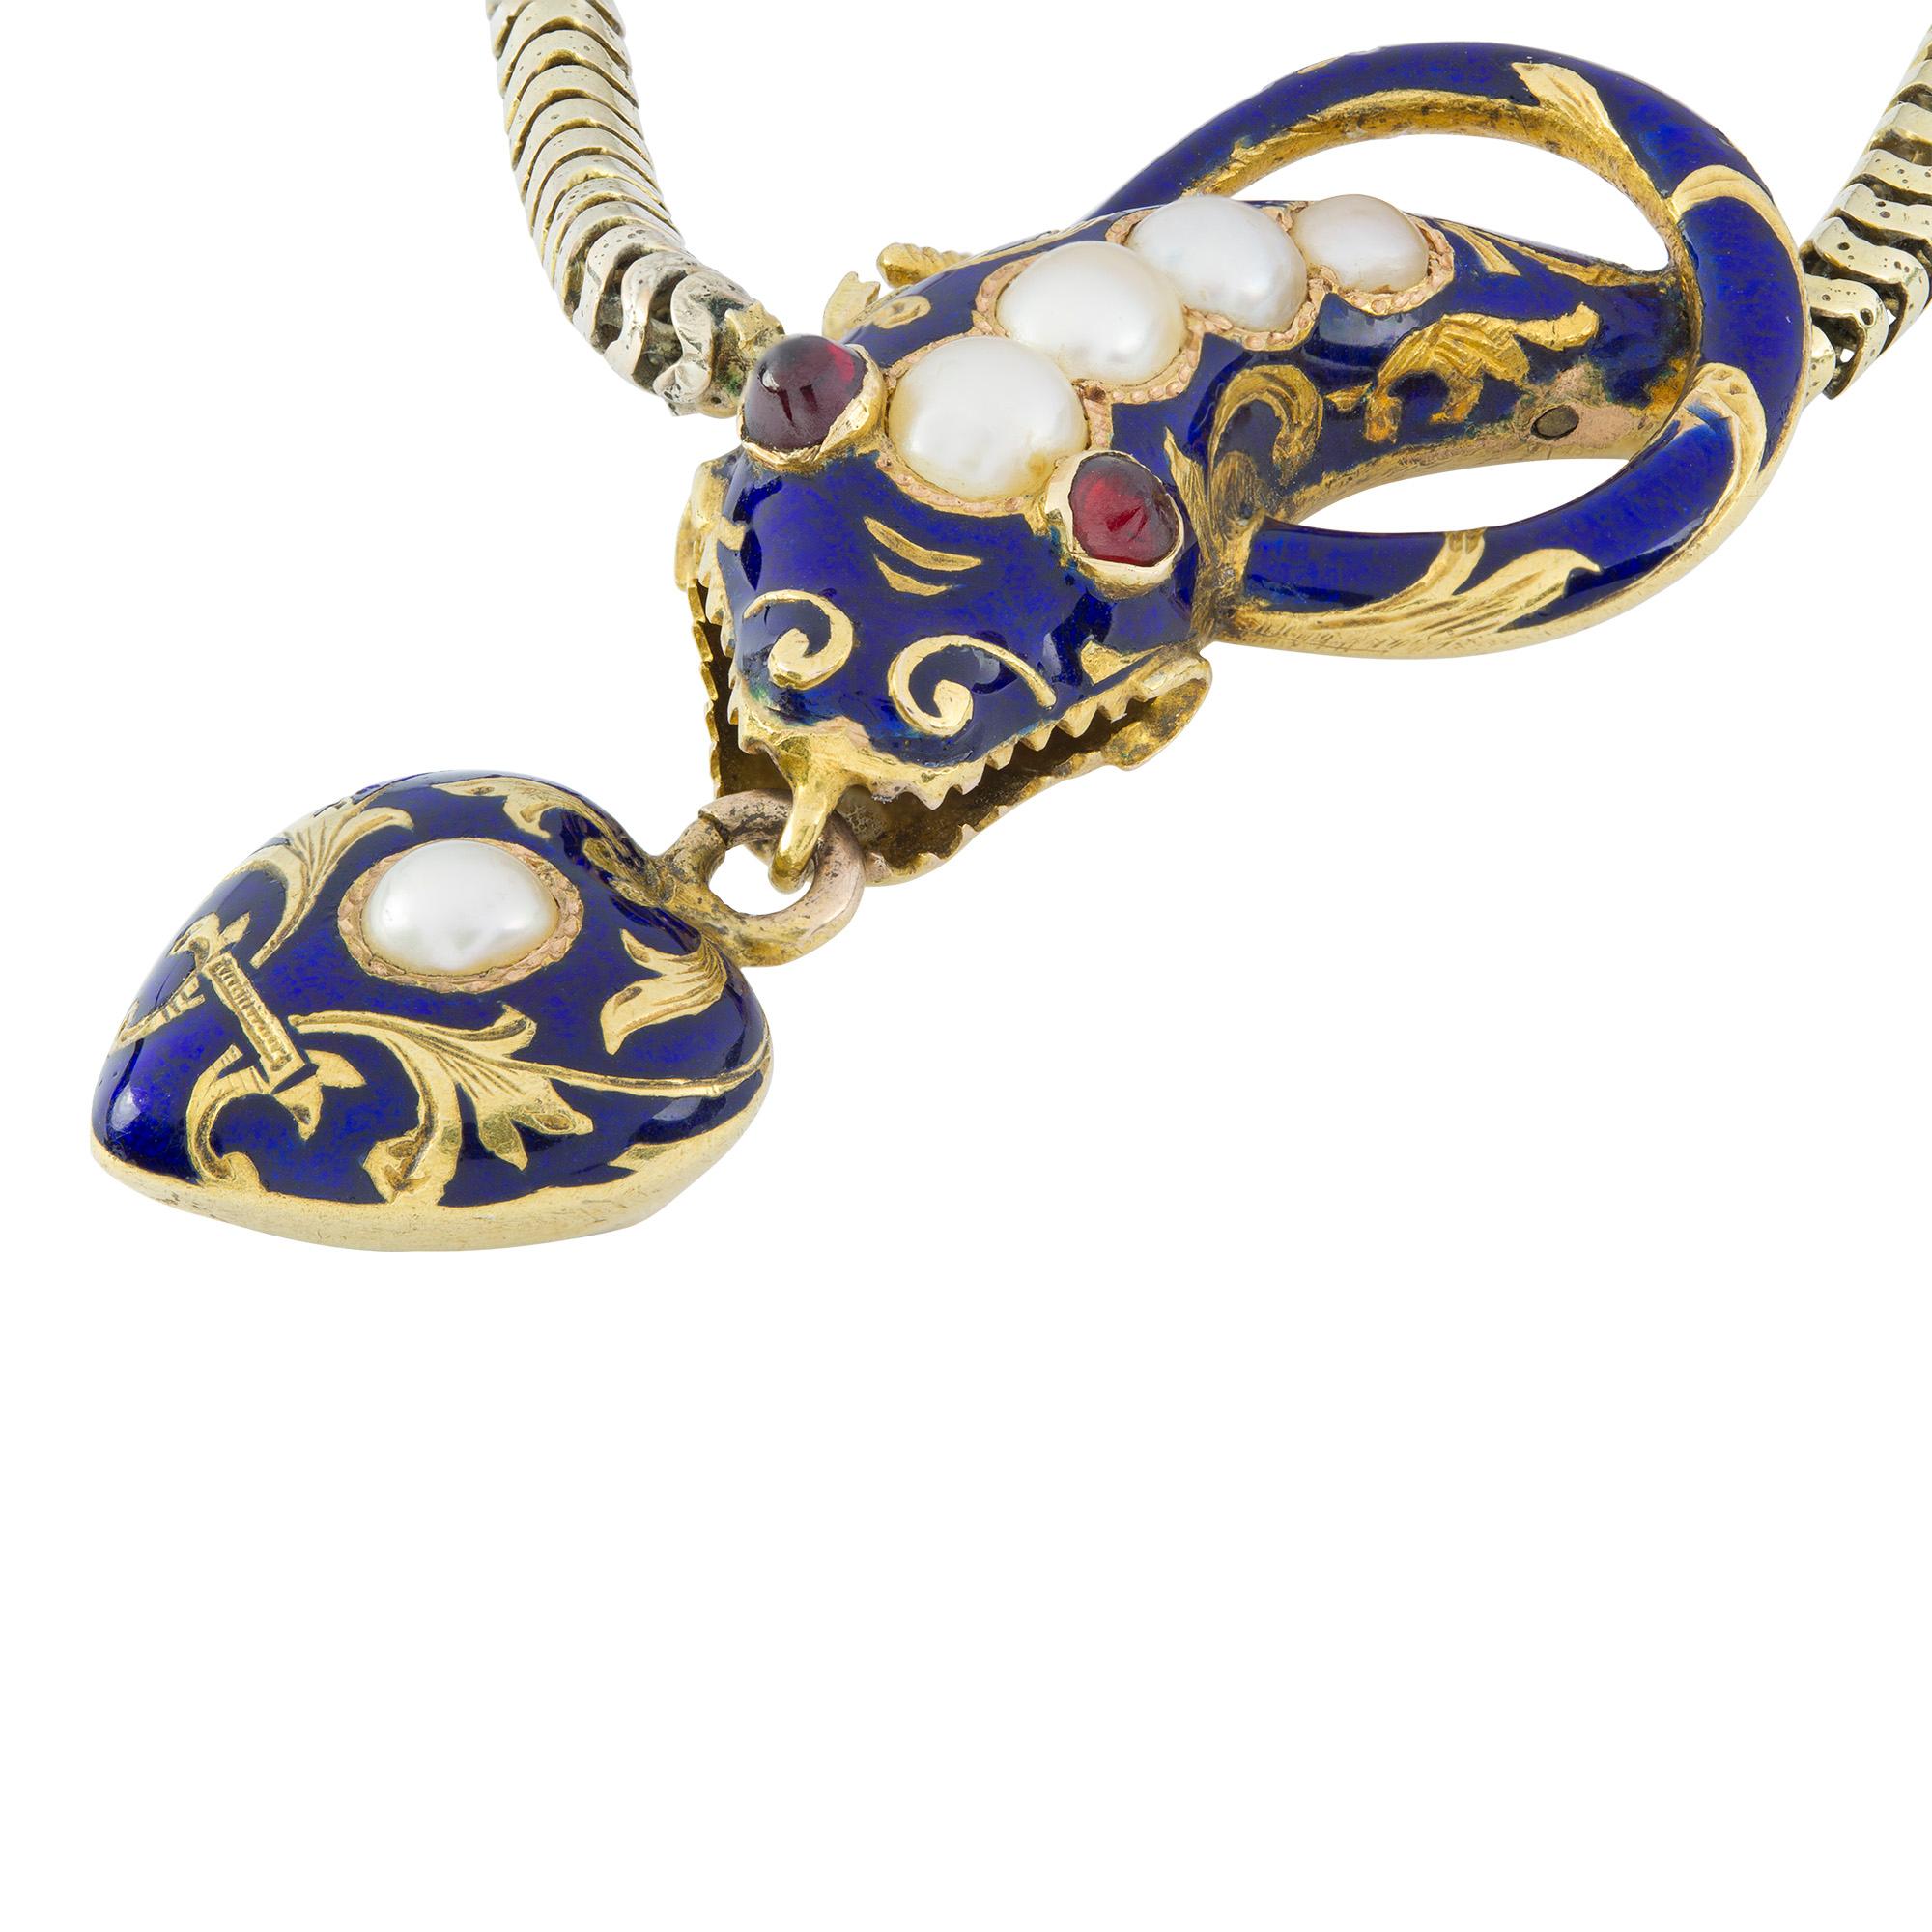 A Victorian blue enamel serpent necklace, the Bristol blue enamelled serpent head with a central row of graduated half pearls, cabochon ruby eyes and a decorative coiled tail, suspending a heart shaped pendant drop from its mouth, all to a yellow